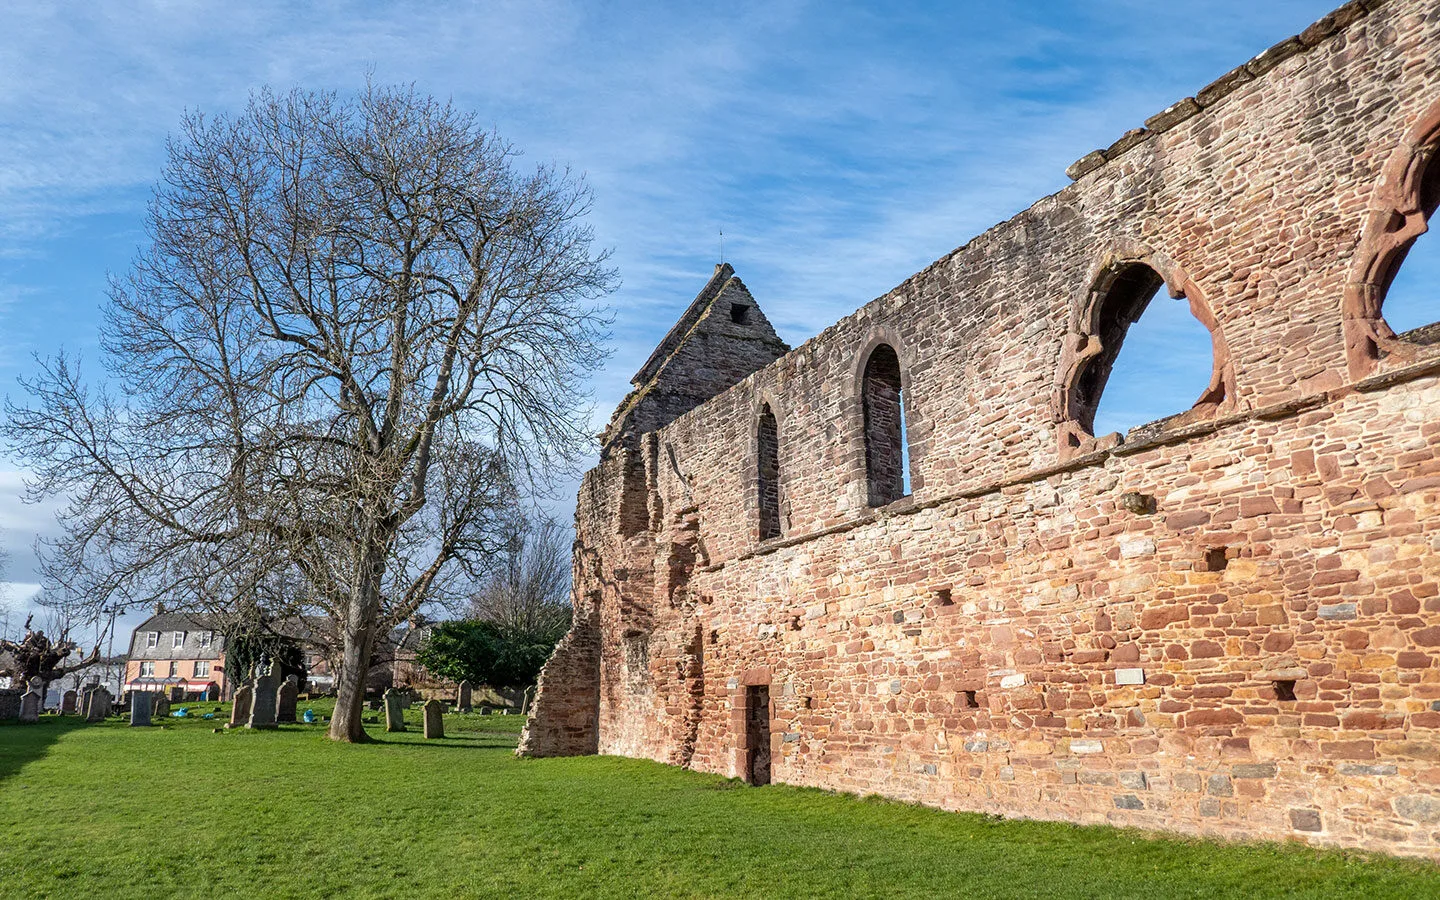 The ruins of the abbey church at Beauly Priory